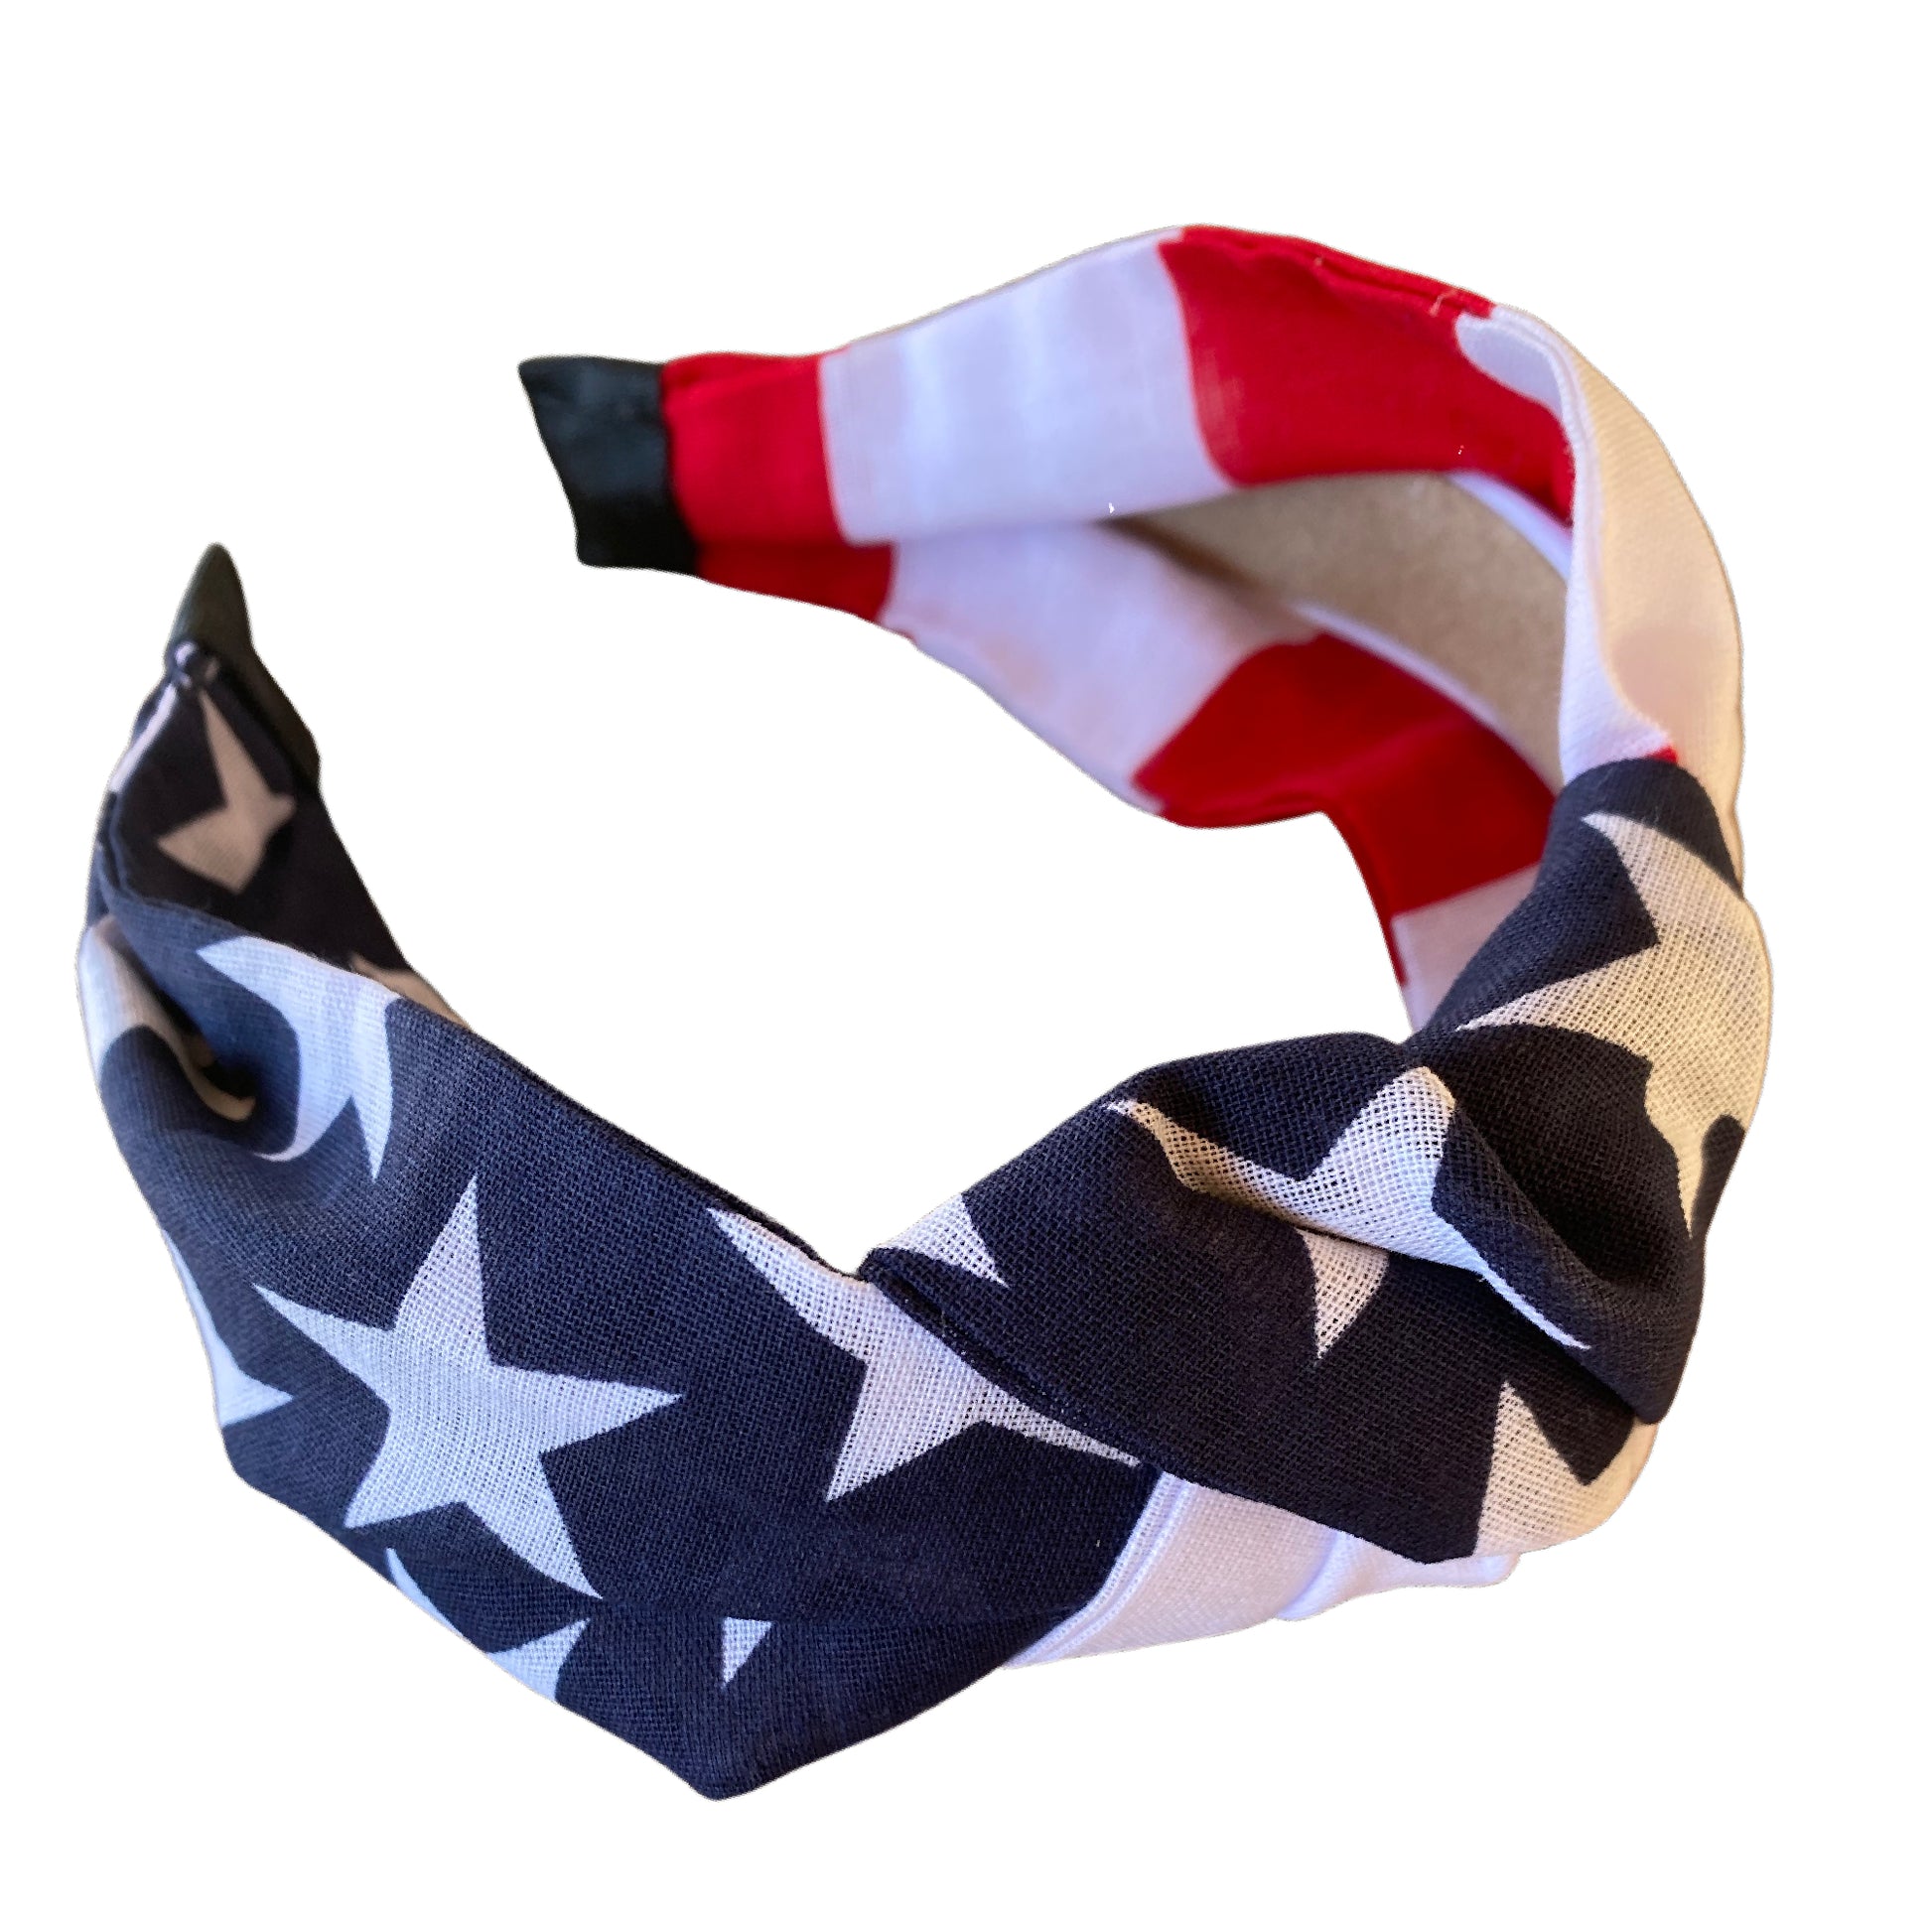 Headband with navy blue and white stars and red and white stripes. Knotted in the center.